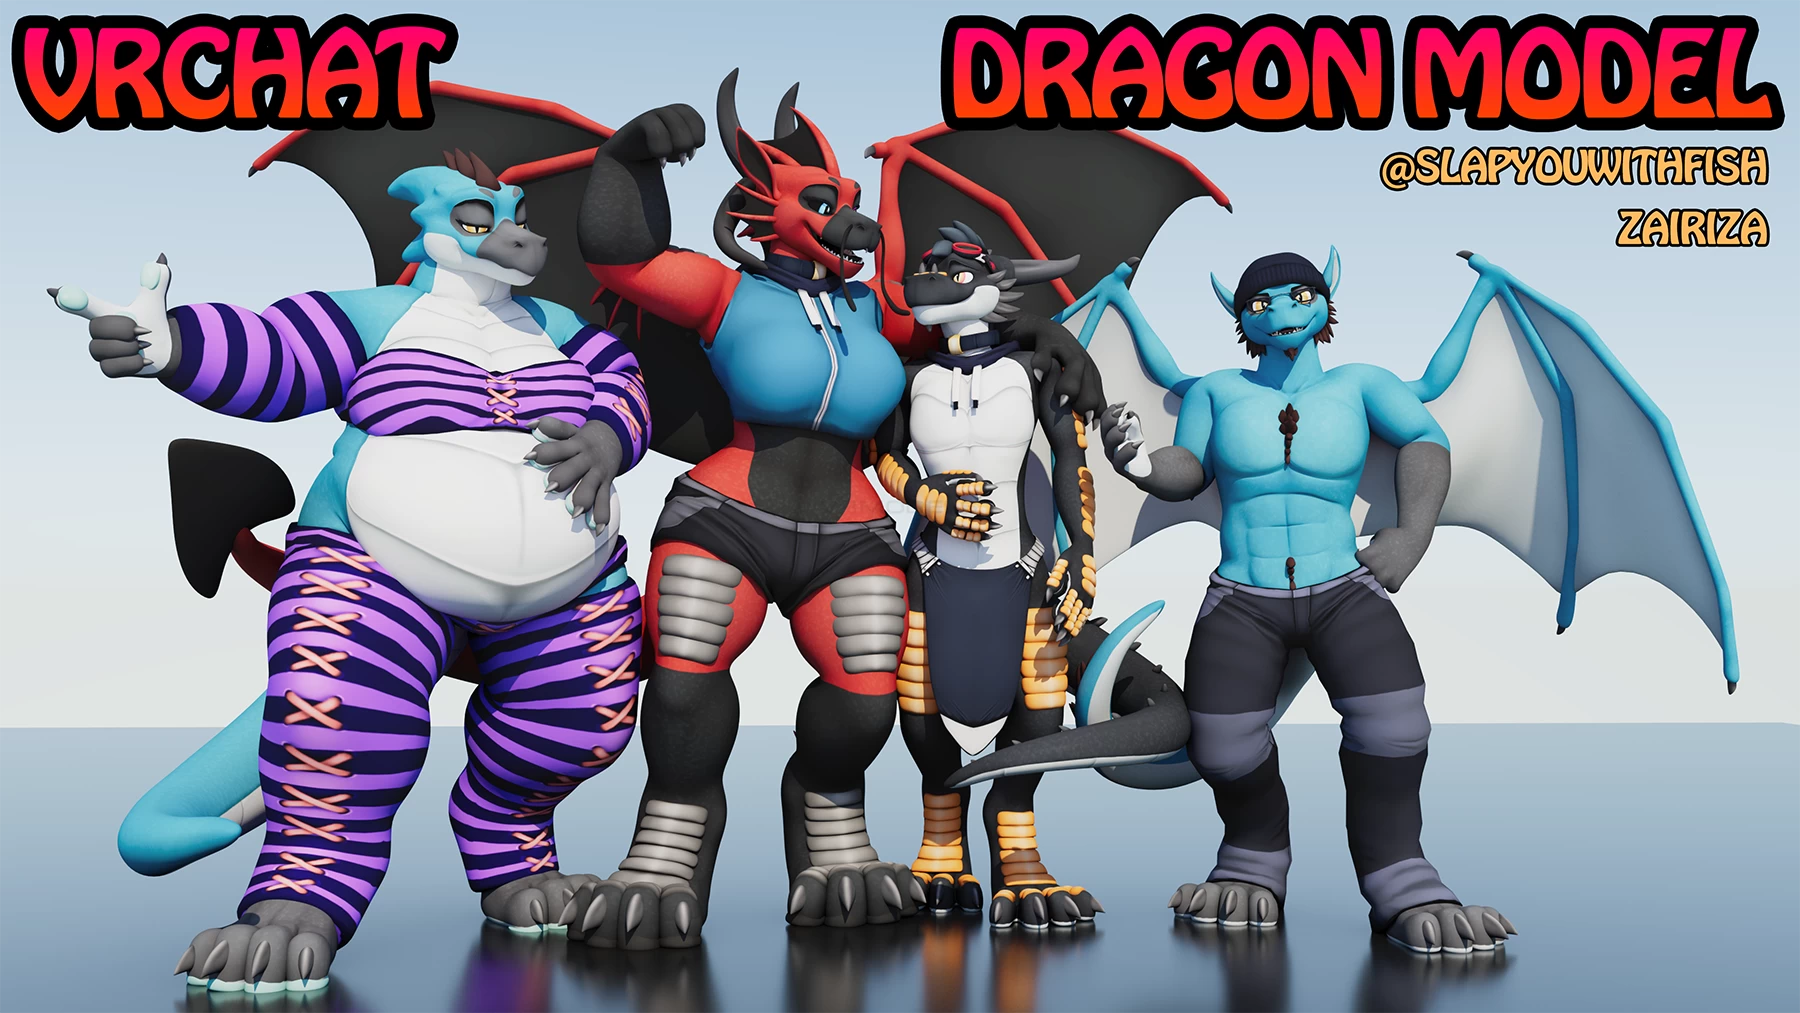 Dragon Vrchat Model Vrmodels D Models For Vr Ar And Cg Projects